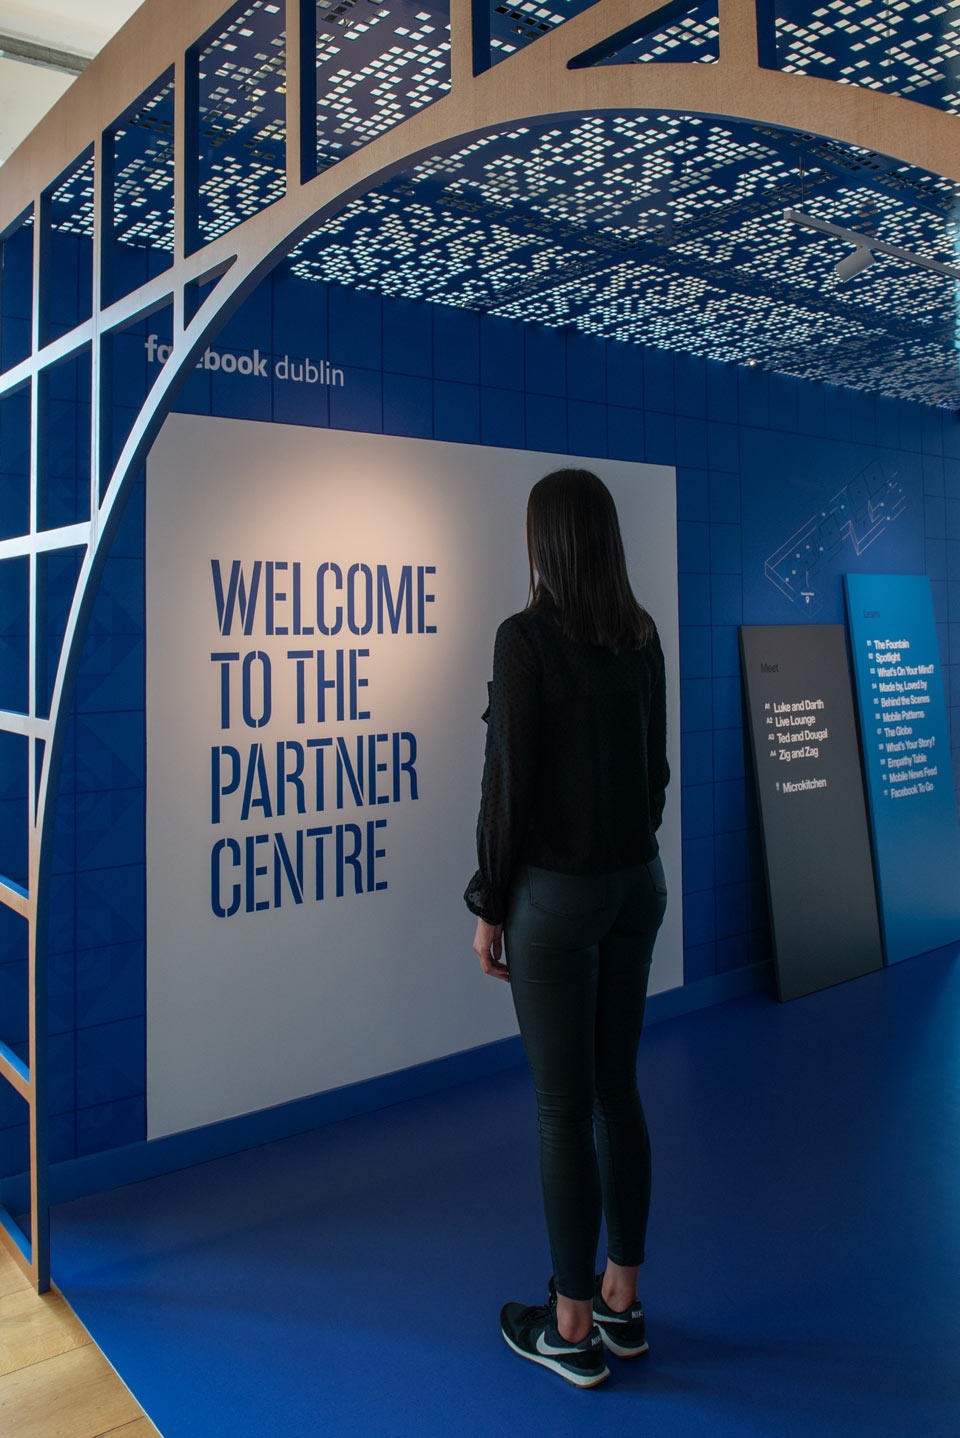 Young woman looking at a sign that says "Welcome to the Partner Center" underneath a logo for "Facebook Dublin", on a blue floor and wall, underneath a grid-like canopy structure